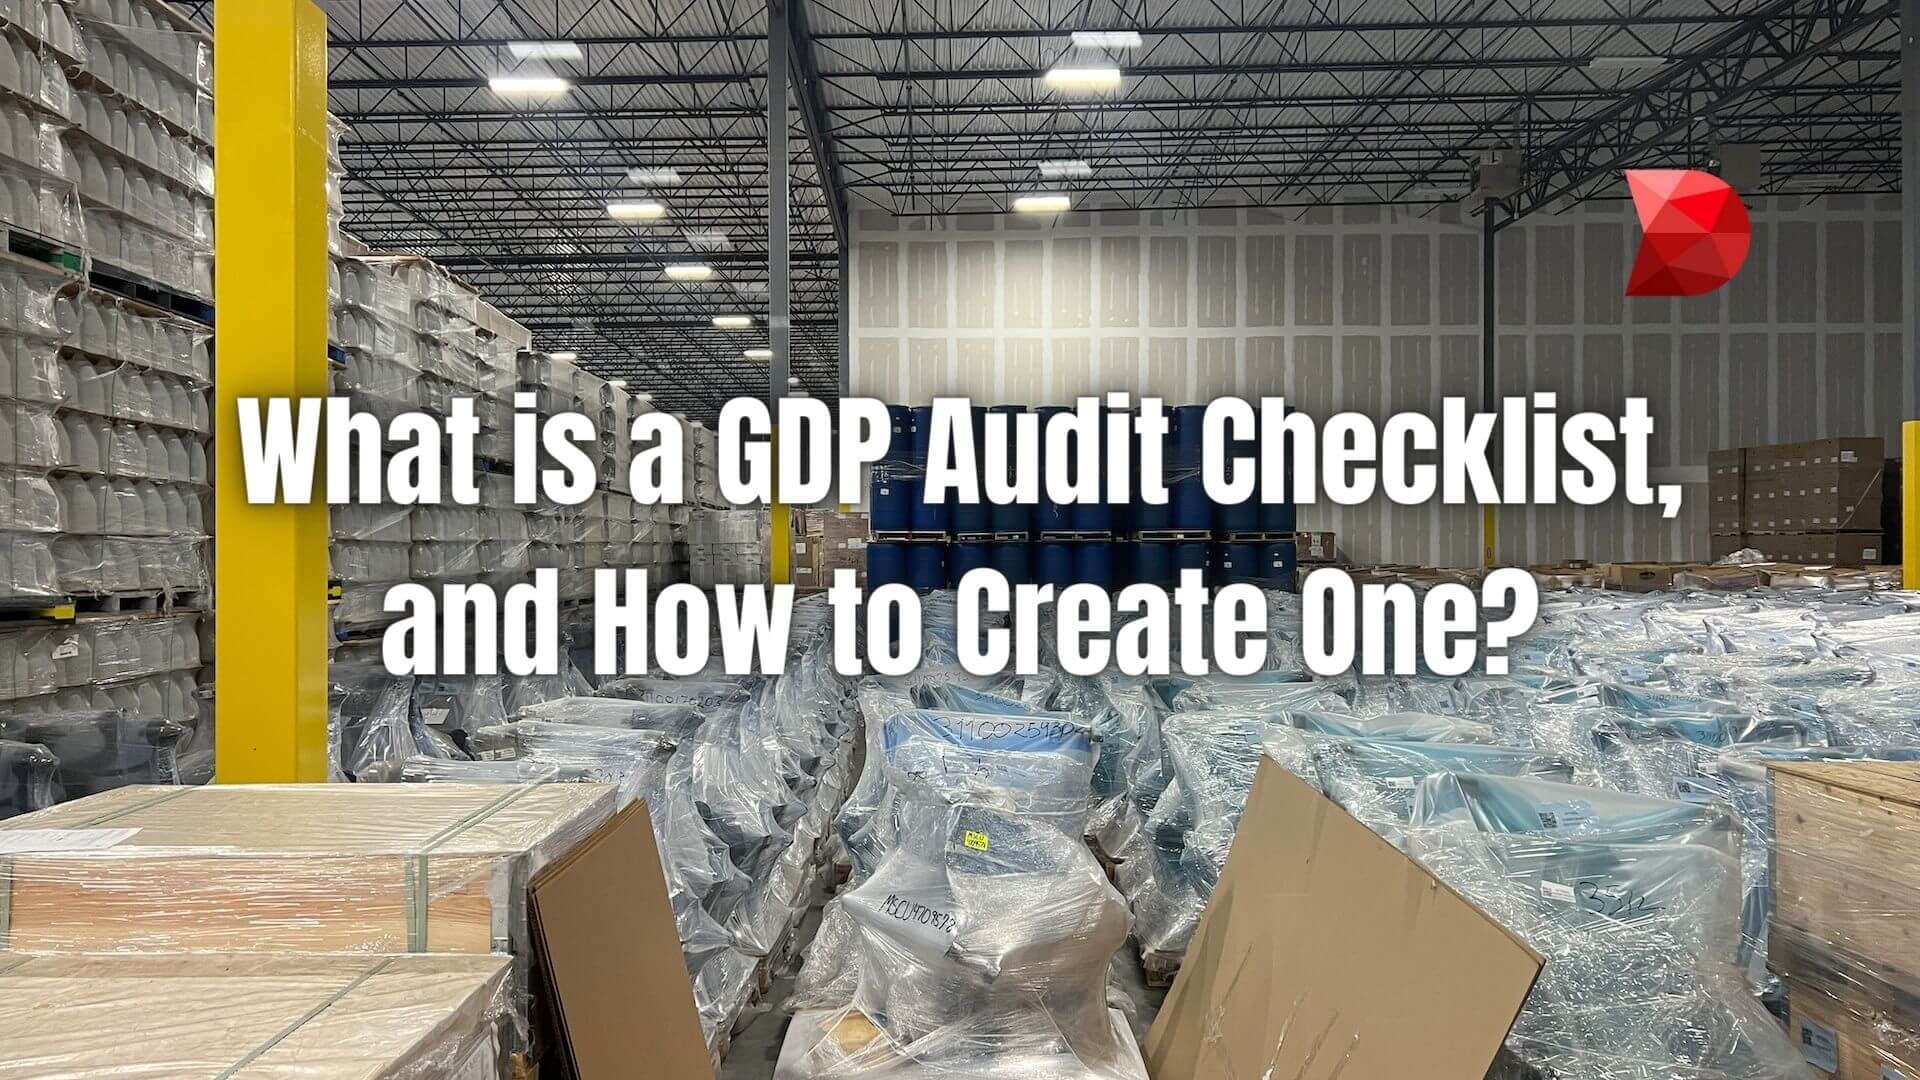 A GDP Audit Checklist is used in the verification of an organization's compliance with Good Distribution Practices. Here's how to create one!